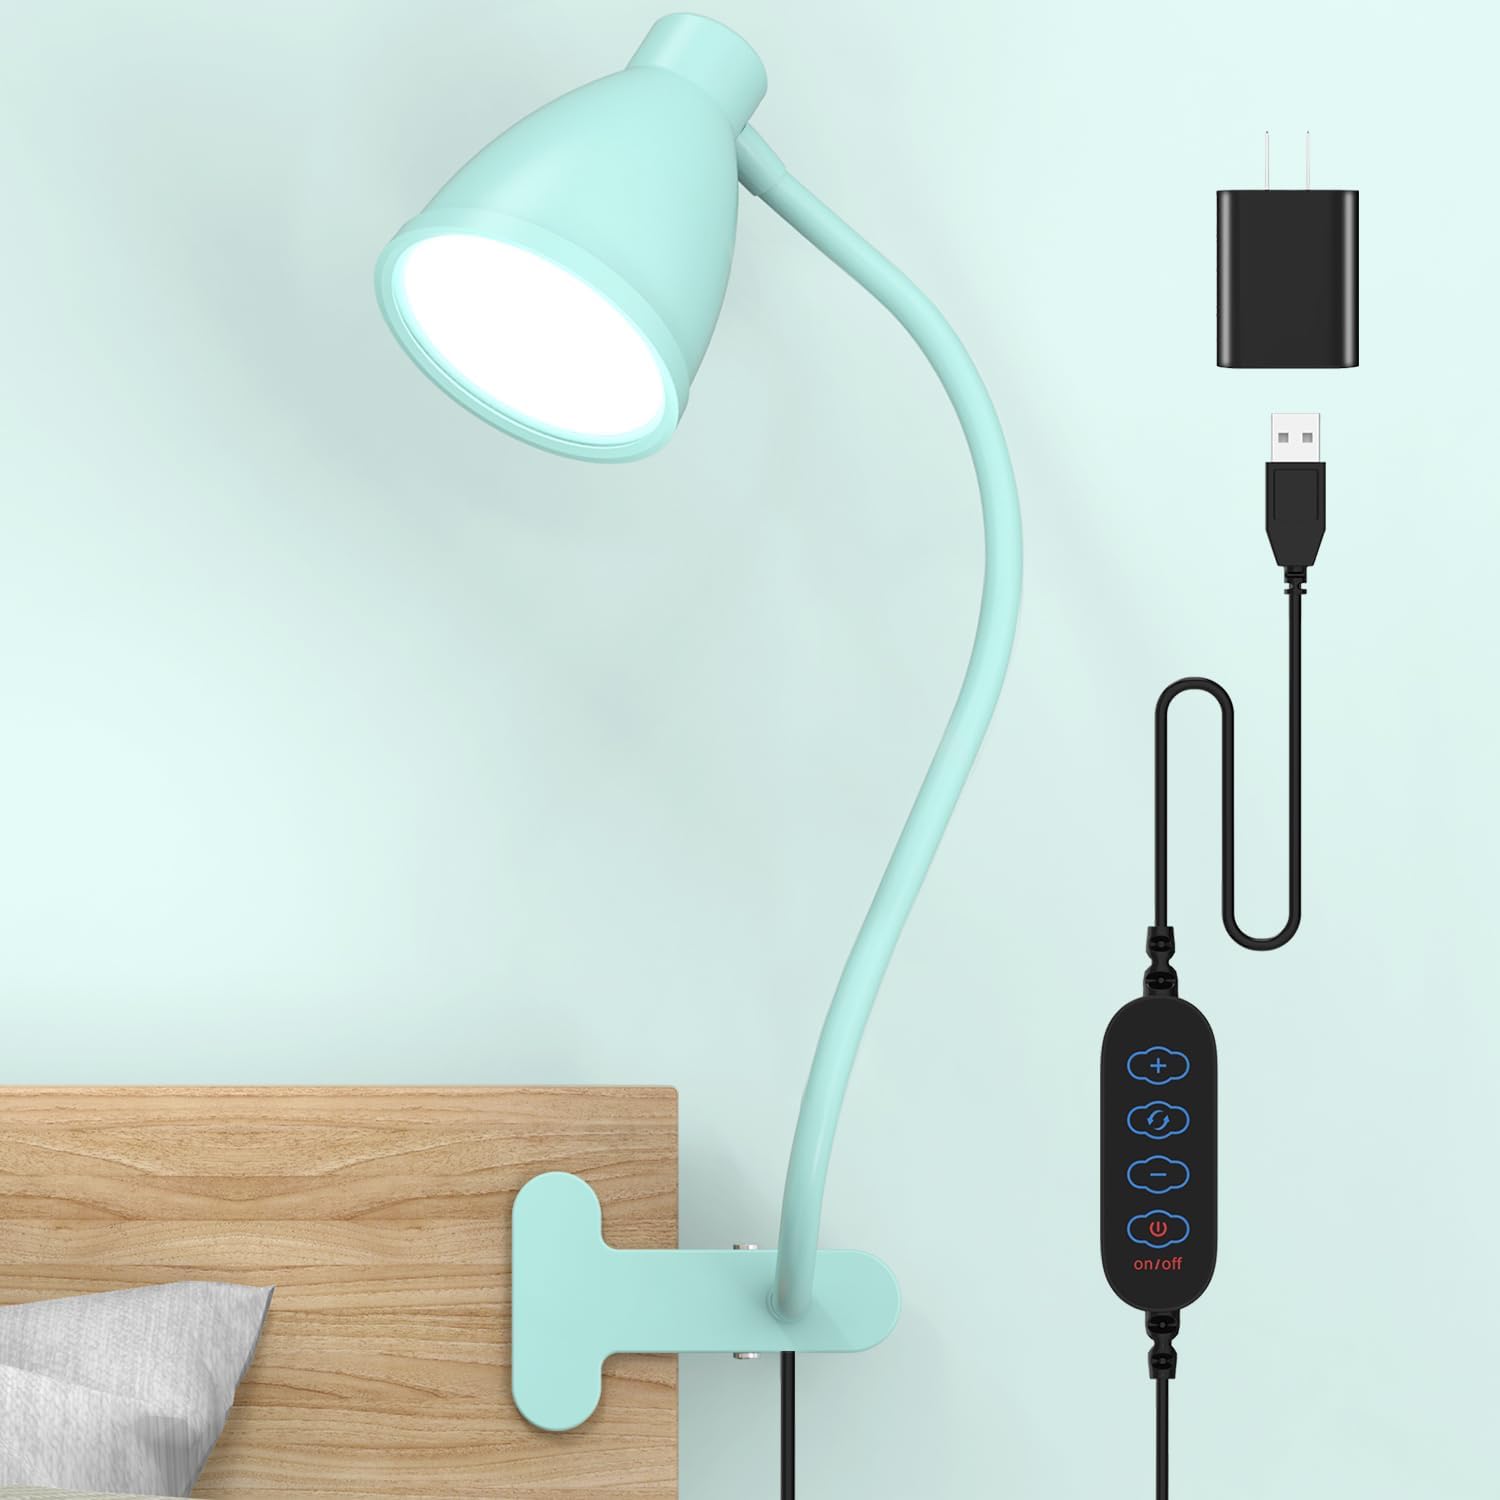 i used these to light areas in all most of my rooms of my apartment. everything about them is good.bendable necks that are long and flexible. they turn on and off well and have different brightness capacity [honestly i generally use the one they turn on with preset]. they aclamp well and stay well on different typs of surfaces- think of a big hair clamp or or a clamp for workroom but less large-but still sturdy. i already had them and bought more rather than a much more expensive stadning lamp a